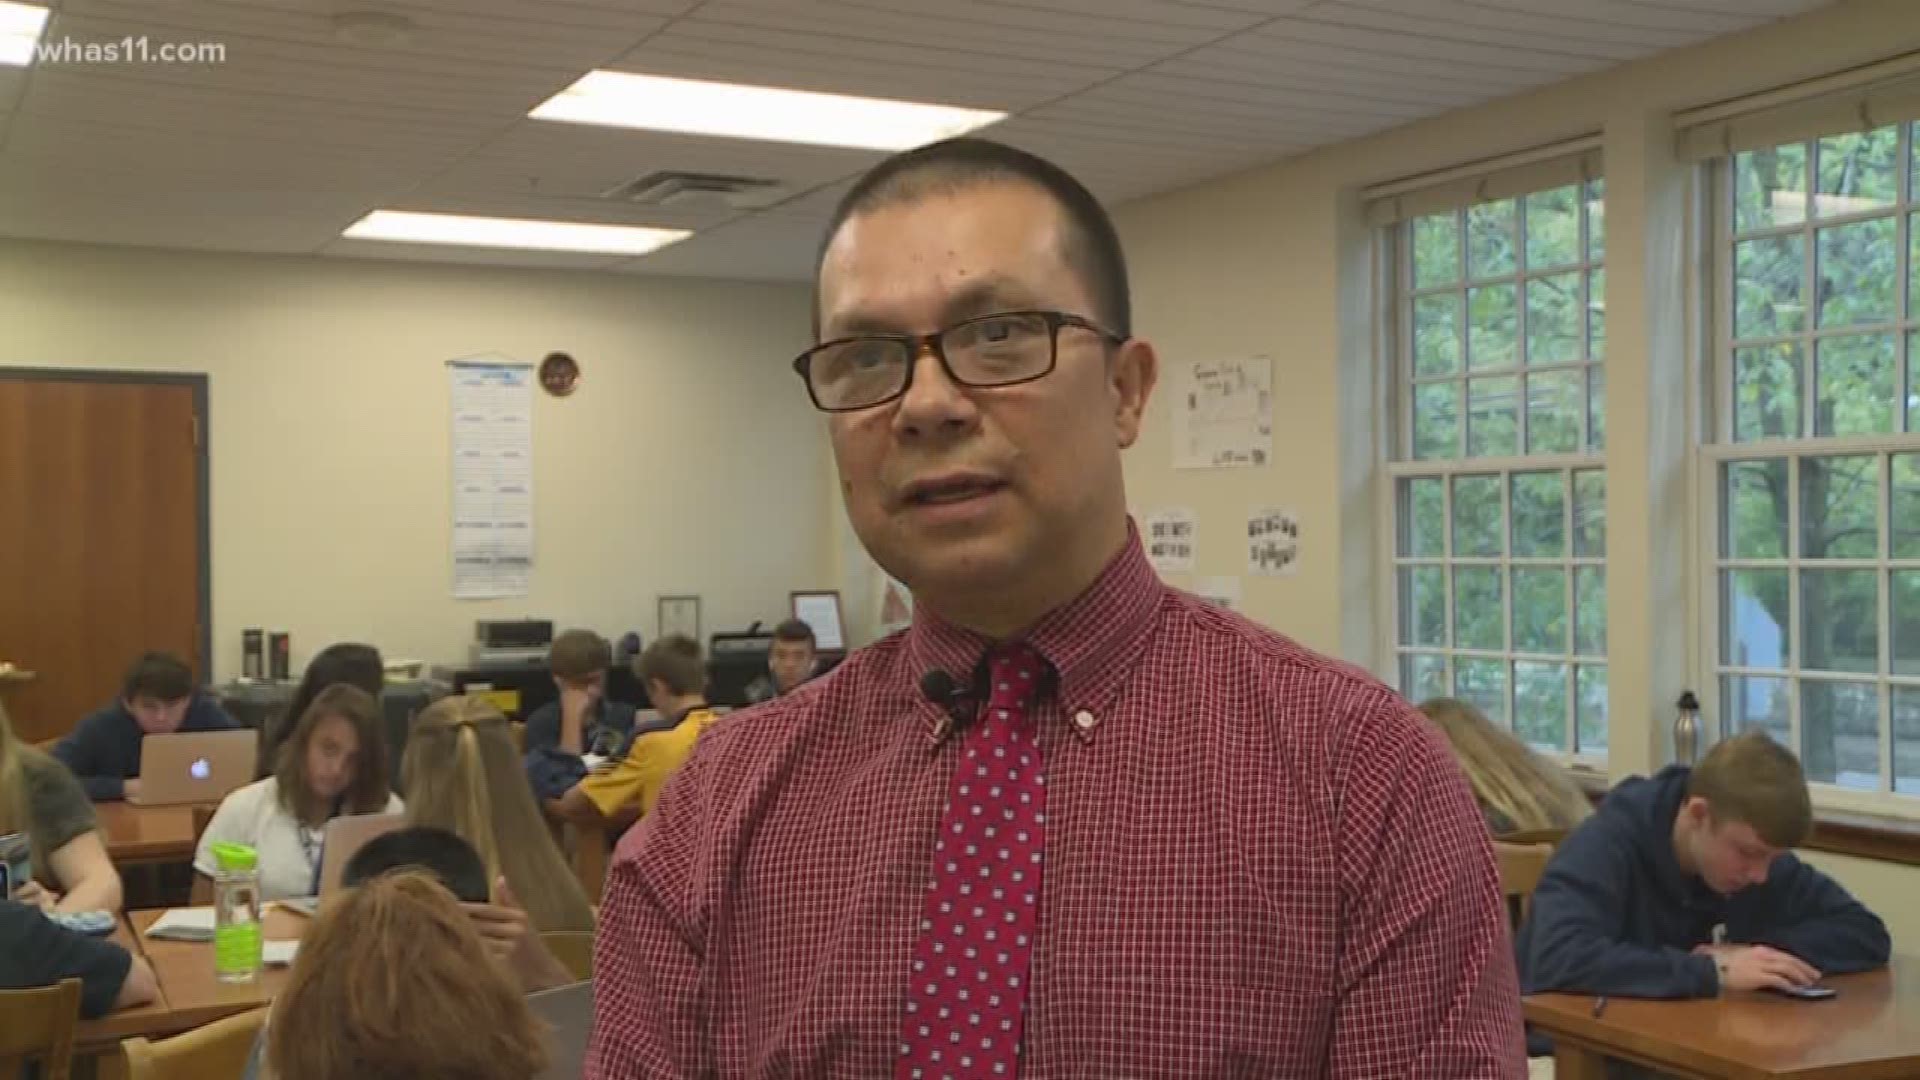 Diego Ojeda is a native Spanish speaker who teaches local students Spanish. He hopes students will become confident enough in the language that they'll be willing to try talking to people in Spanish in the community.